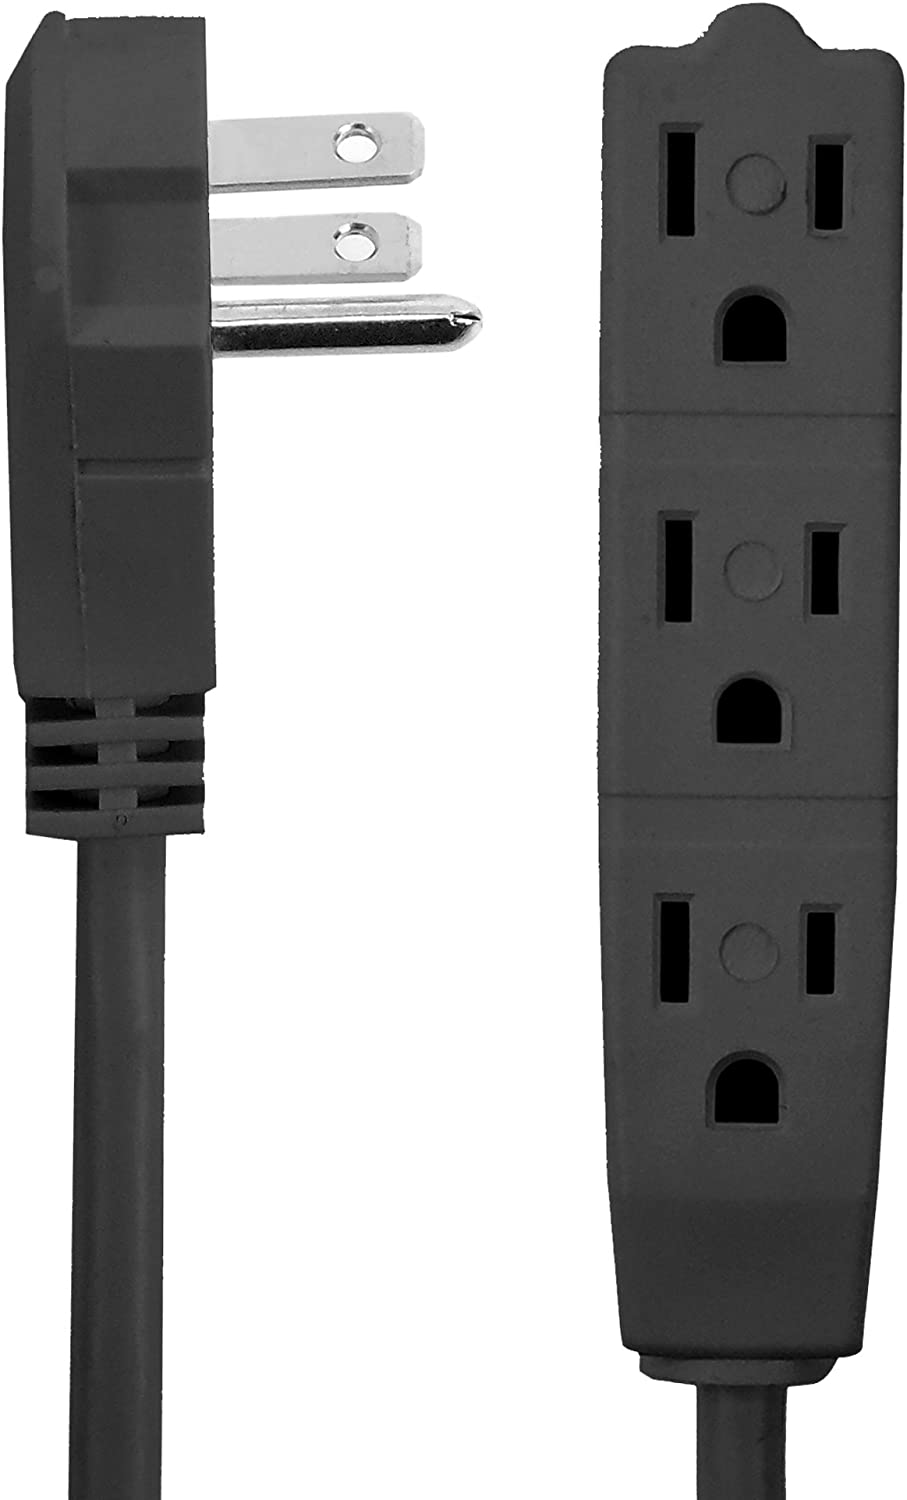 BindMaster 8 Feet Extension Cord/Wire, 3 Prong Grounded, 3 outlets, Angled Flat Plug, Black